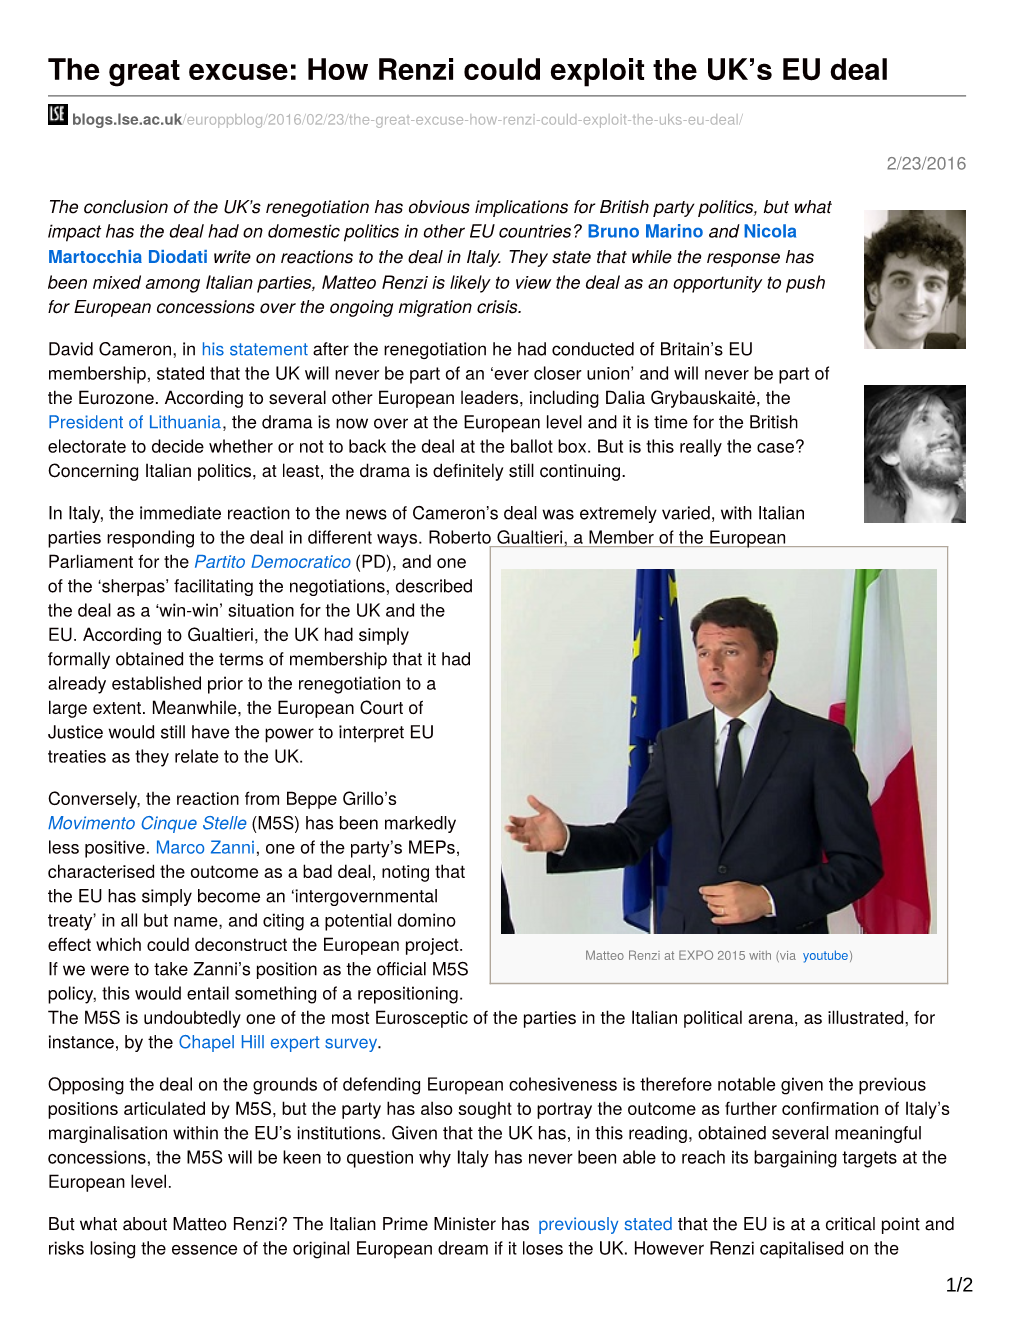 The Great Excuse: How Renzi Could Exploit the UK's EU Deal